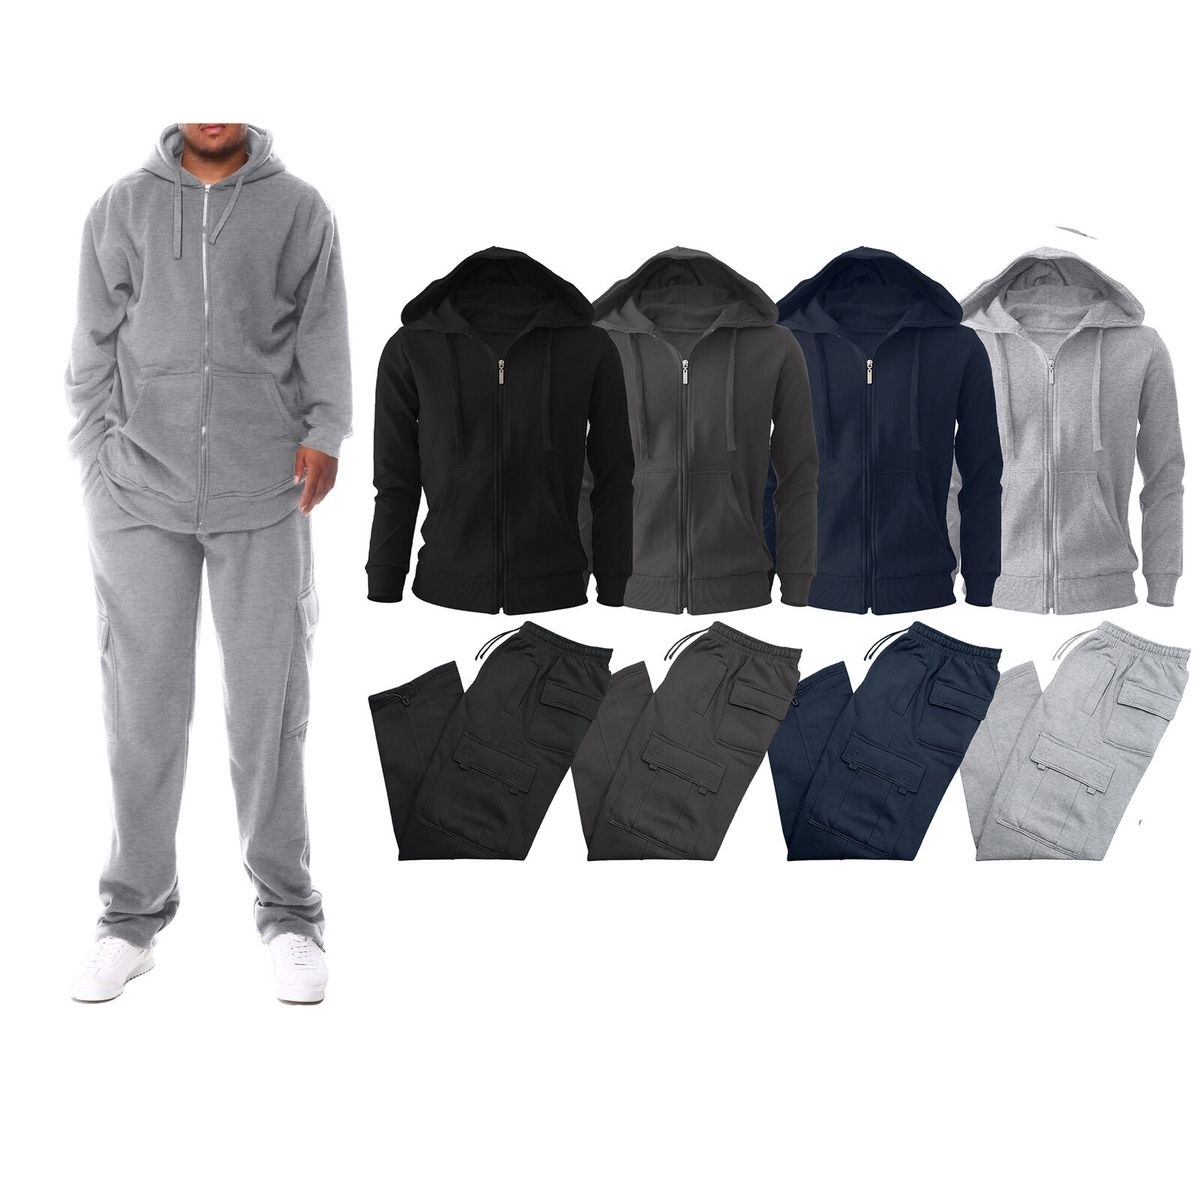 Multi-Pack: Men's Big & Tall Winter Warm Athletic Active Cozy Fleece Lined Multi-Pocket Full Zip Up Cargo Tracksuit - Navy, 1-pack, Small